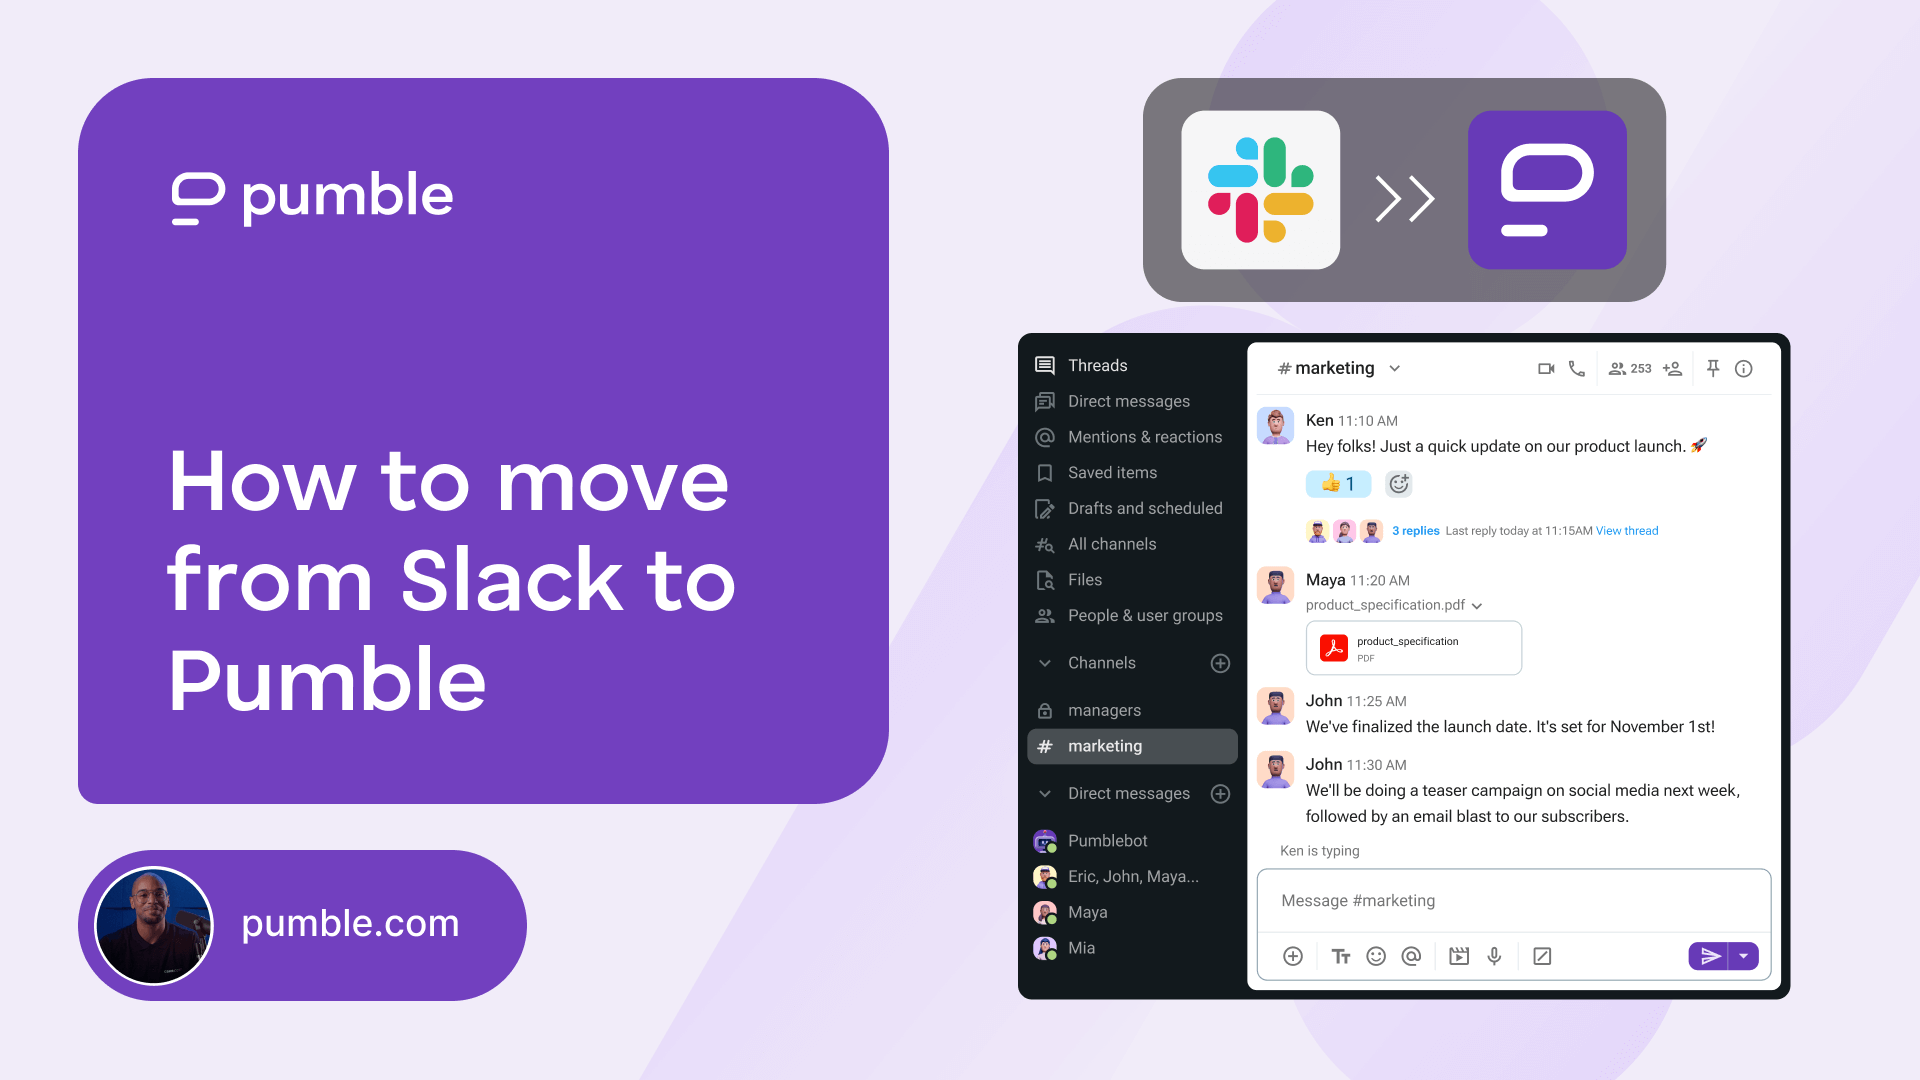 How to move from Slack to Pumble